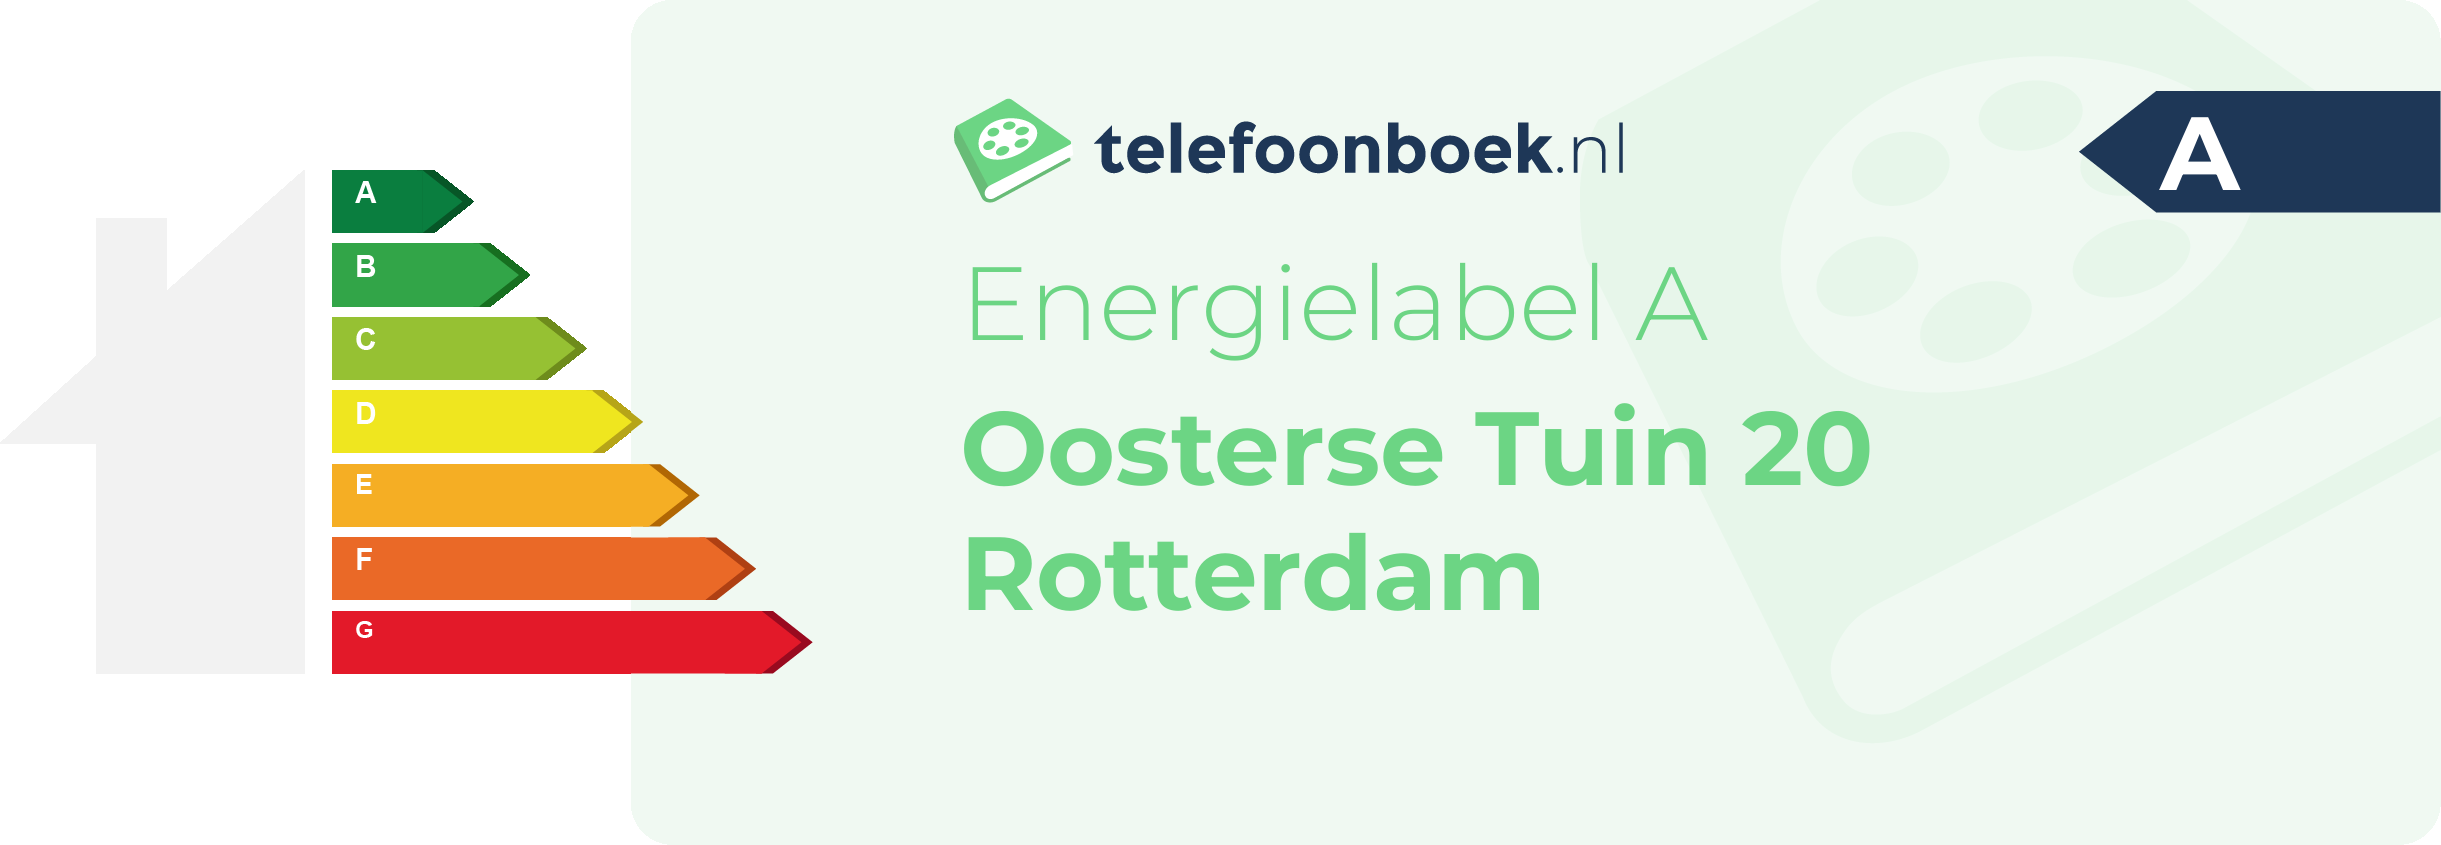 Energielabel Oosterse Tuin 20 Rotterdam